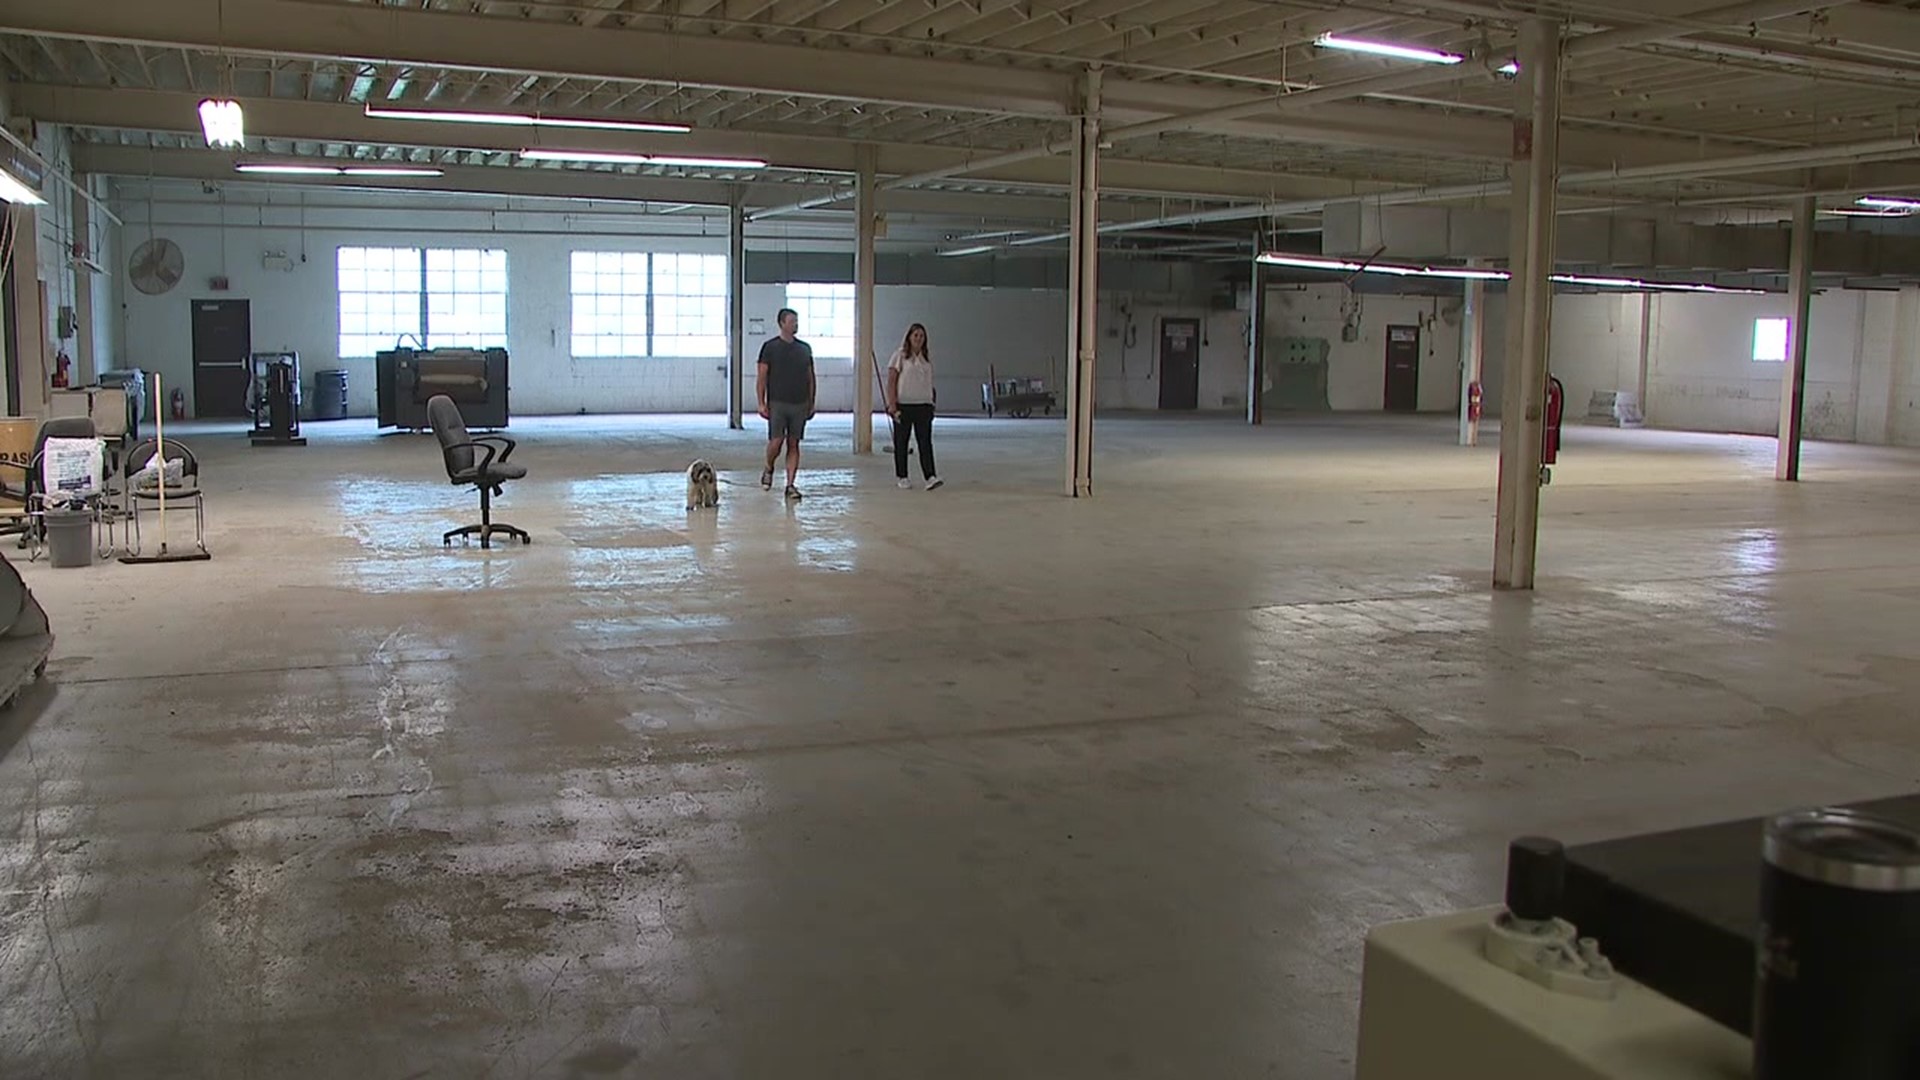 Newswatch 16's Nikki Krize got a sneak peek of the new digs for the ski and snowboard manufacturing firm.